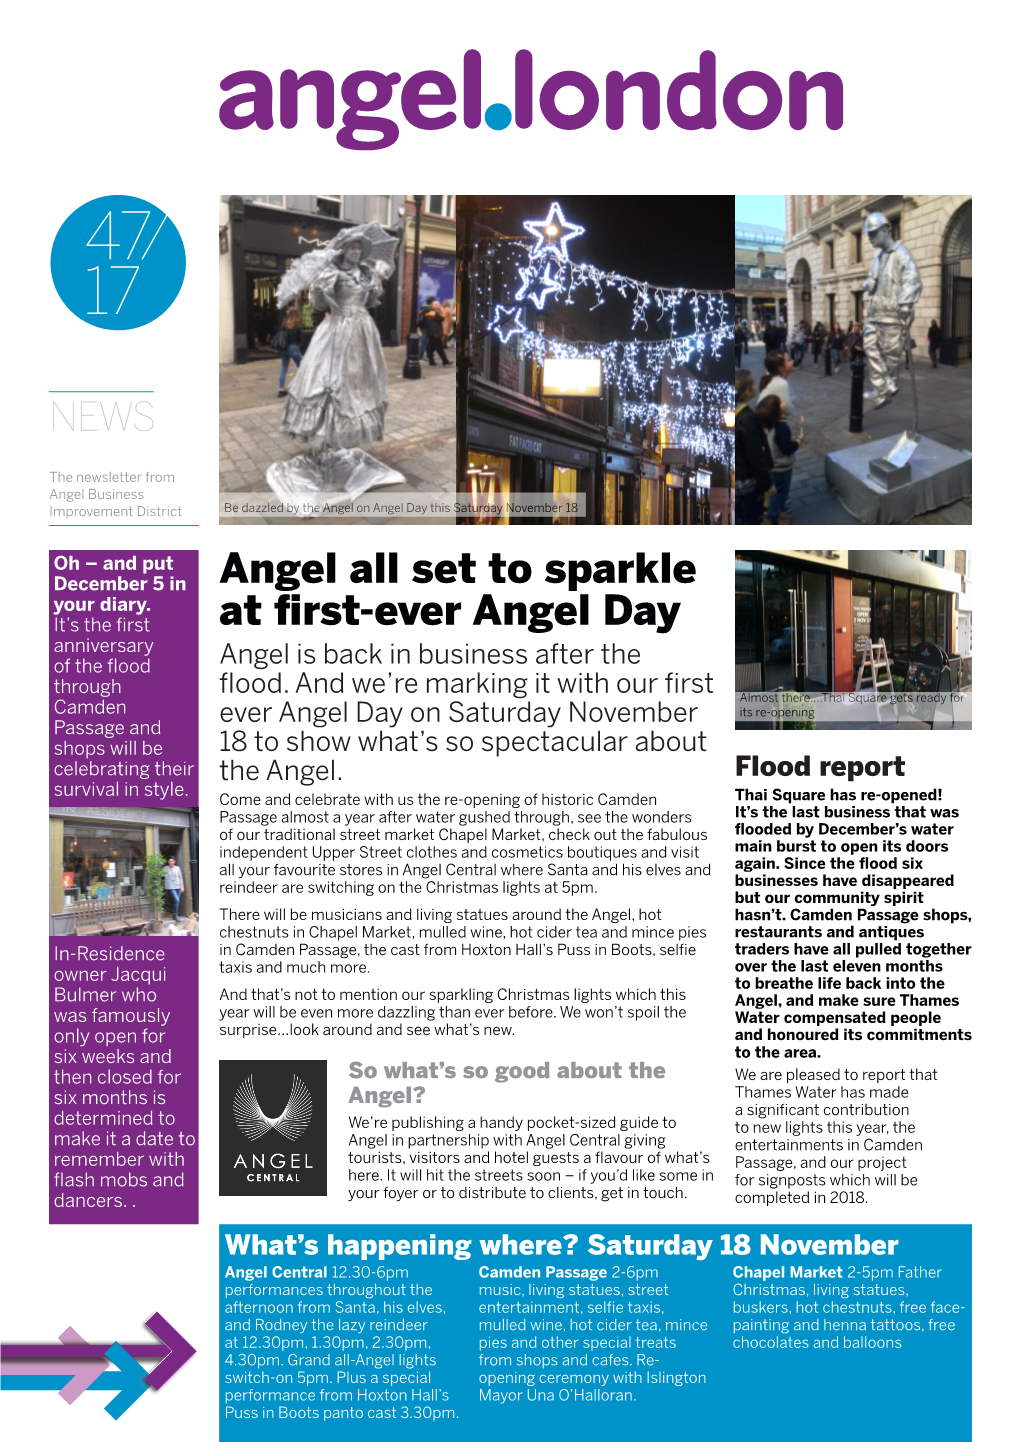 Angel All Set to Sparkle at First-Ever Angel